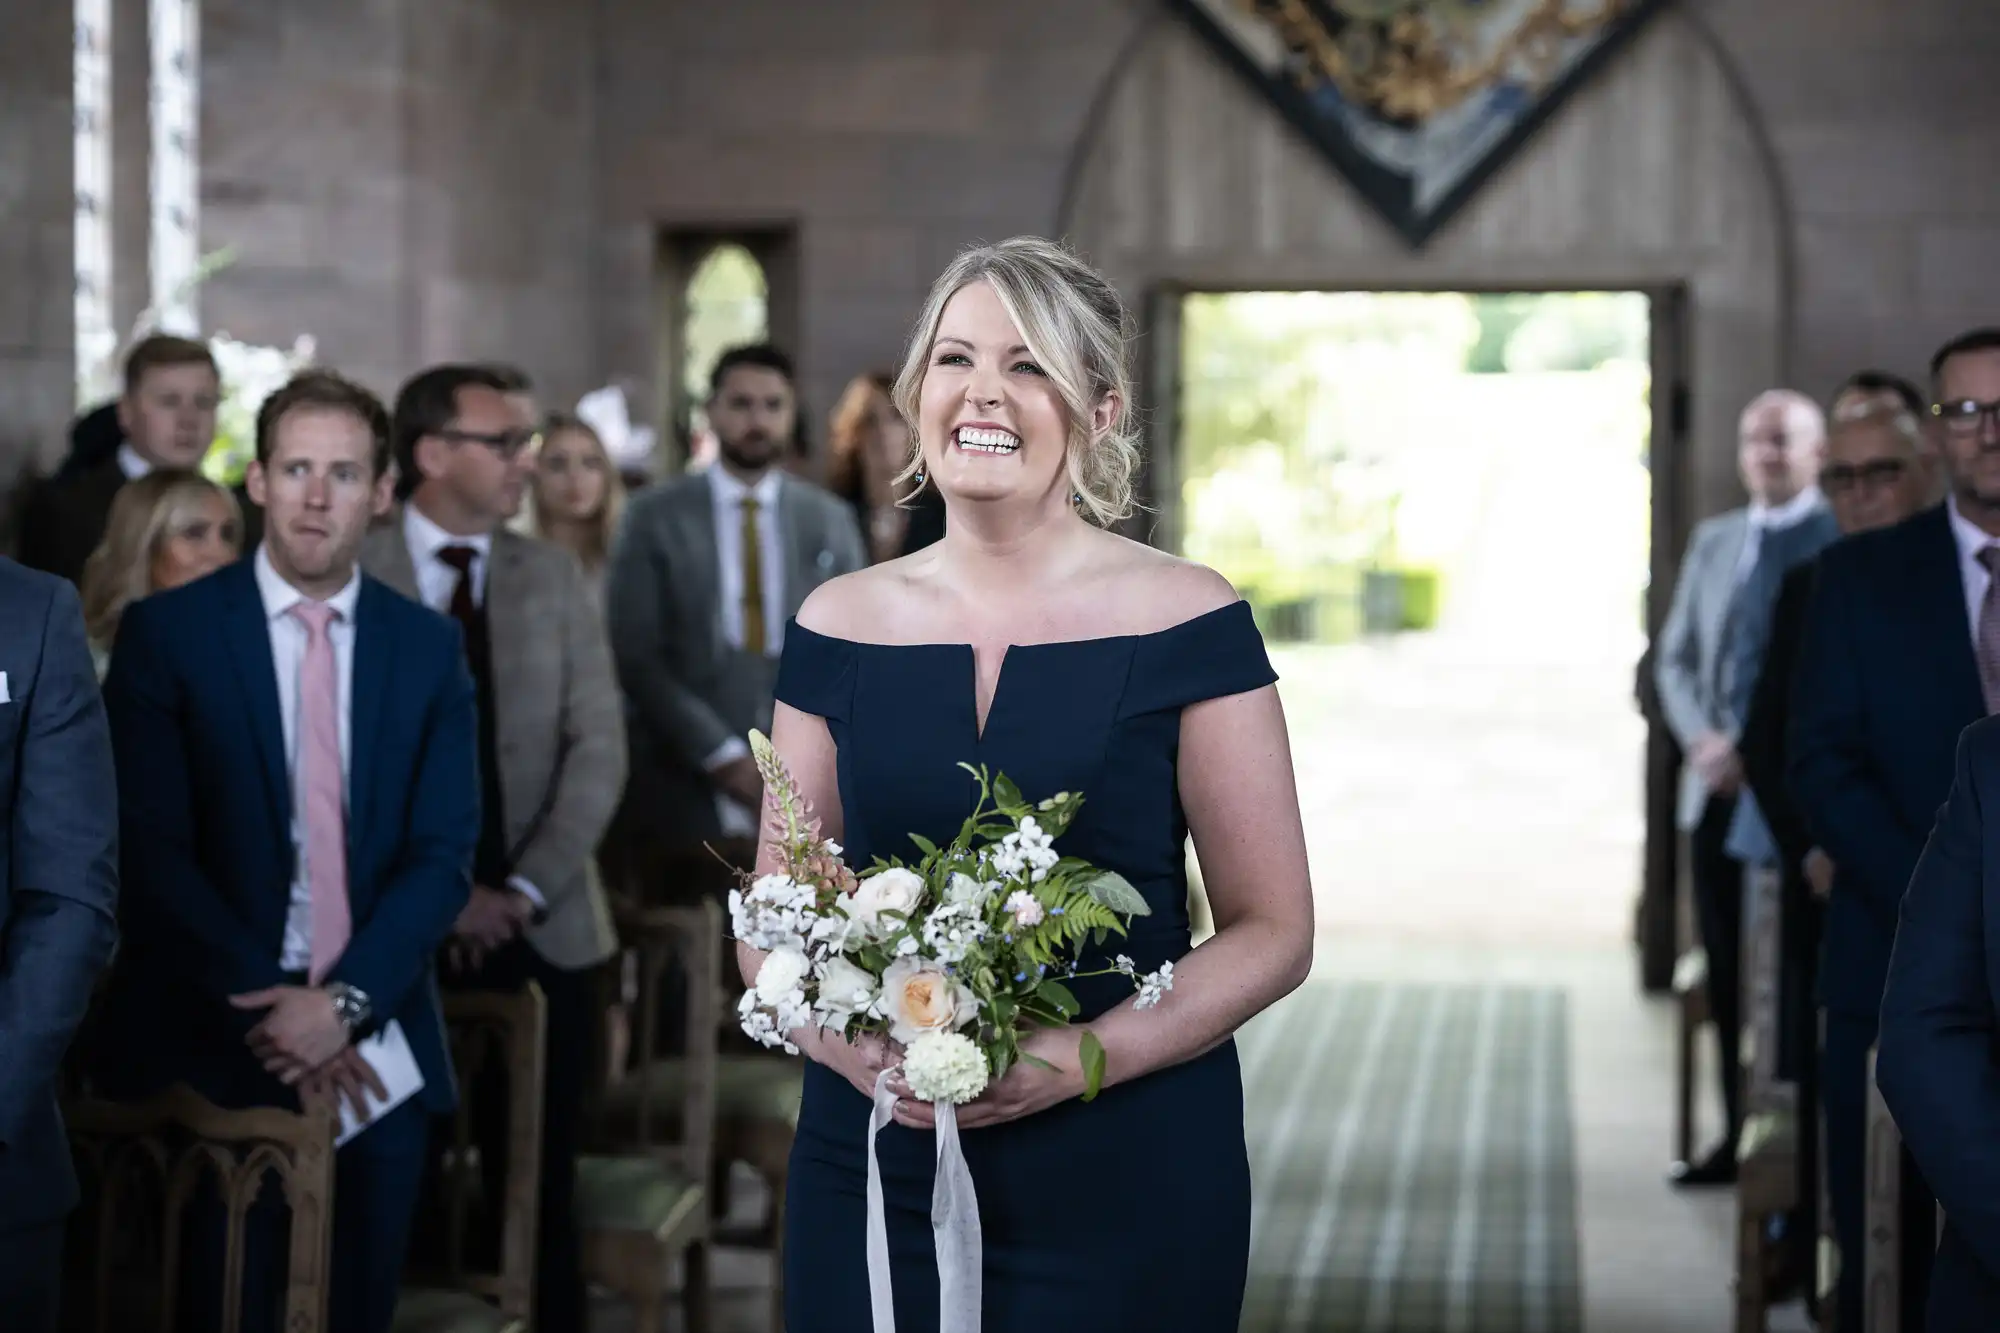 A smiling woman in a dark blue dress holding a bouquet walks down the aisle of a church, with seated guests watching.